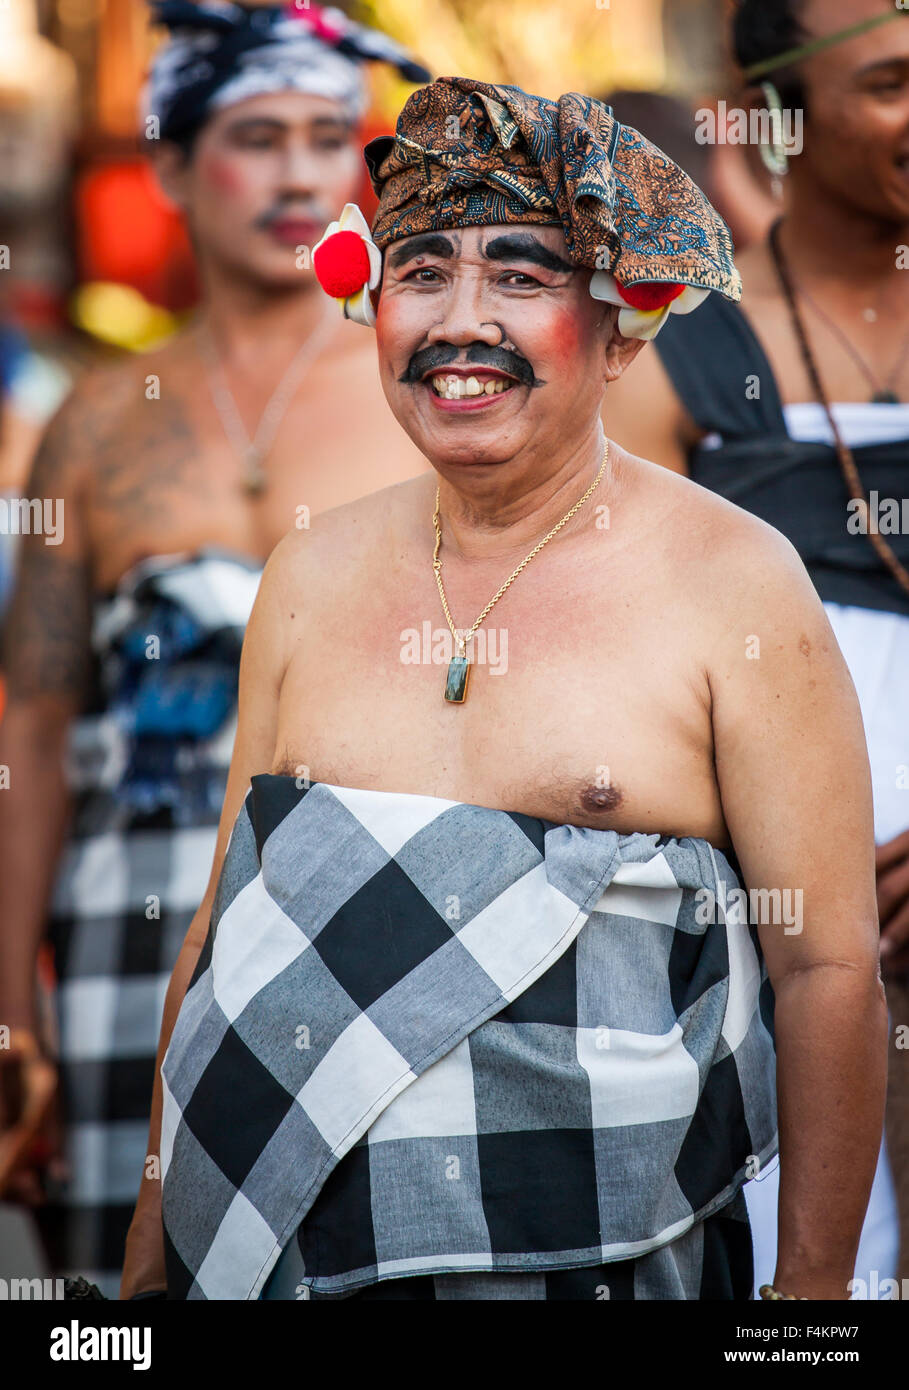 Balinese Man In Traditional Attire At Sanur Village Festivals Street Parade On August 30th 